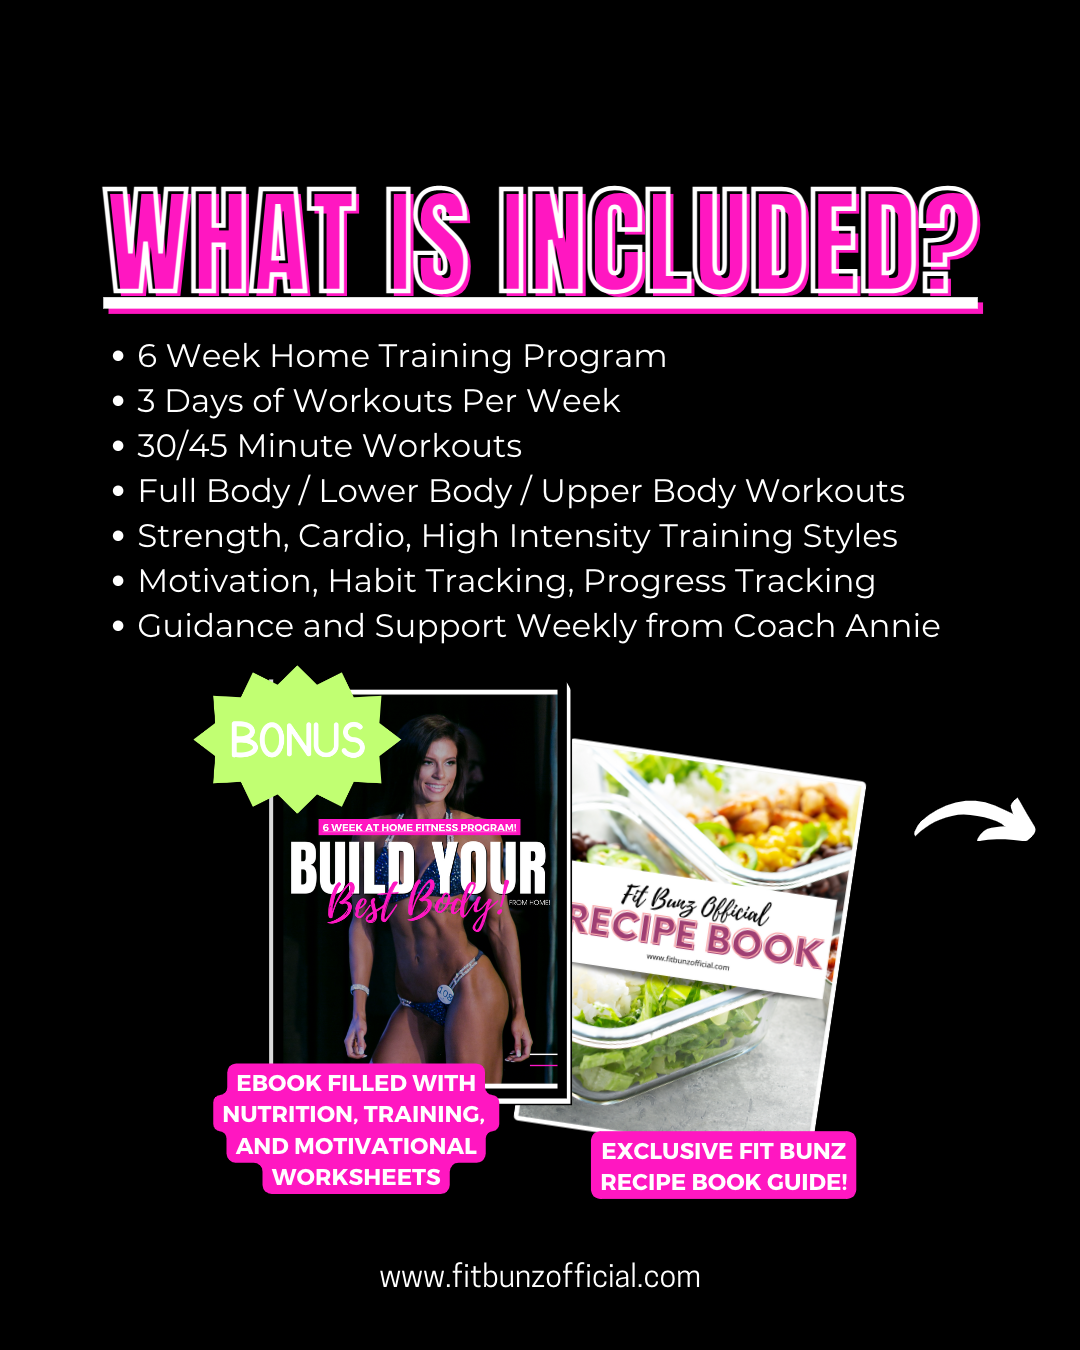 BUILD YOUR BEST BODY 6 WEEK AT HOME TRAINING PROGRAM